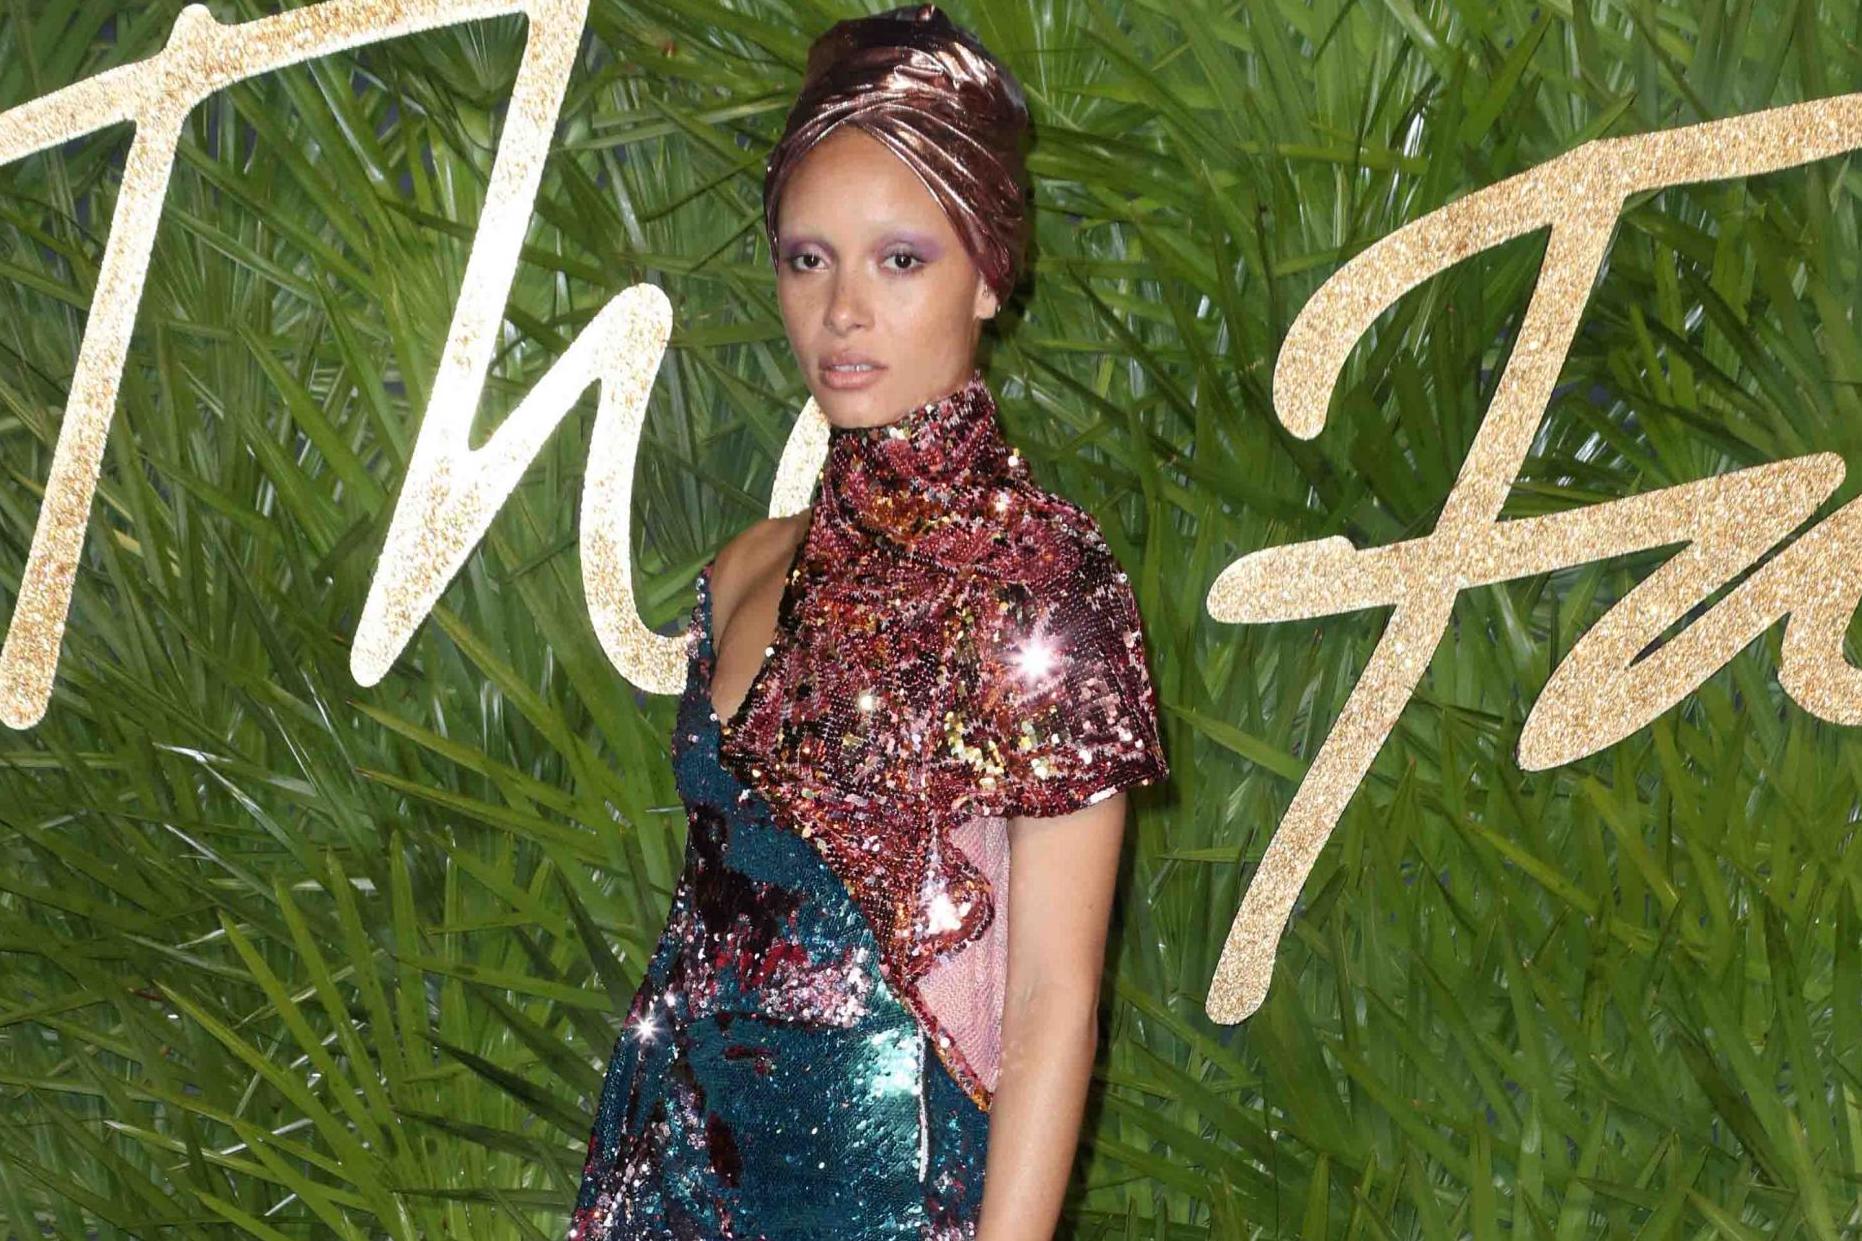 Adwoah Aboah quite literally sparkles in Halpern at the 2017 Fashion Awards